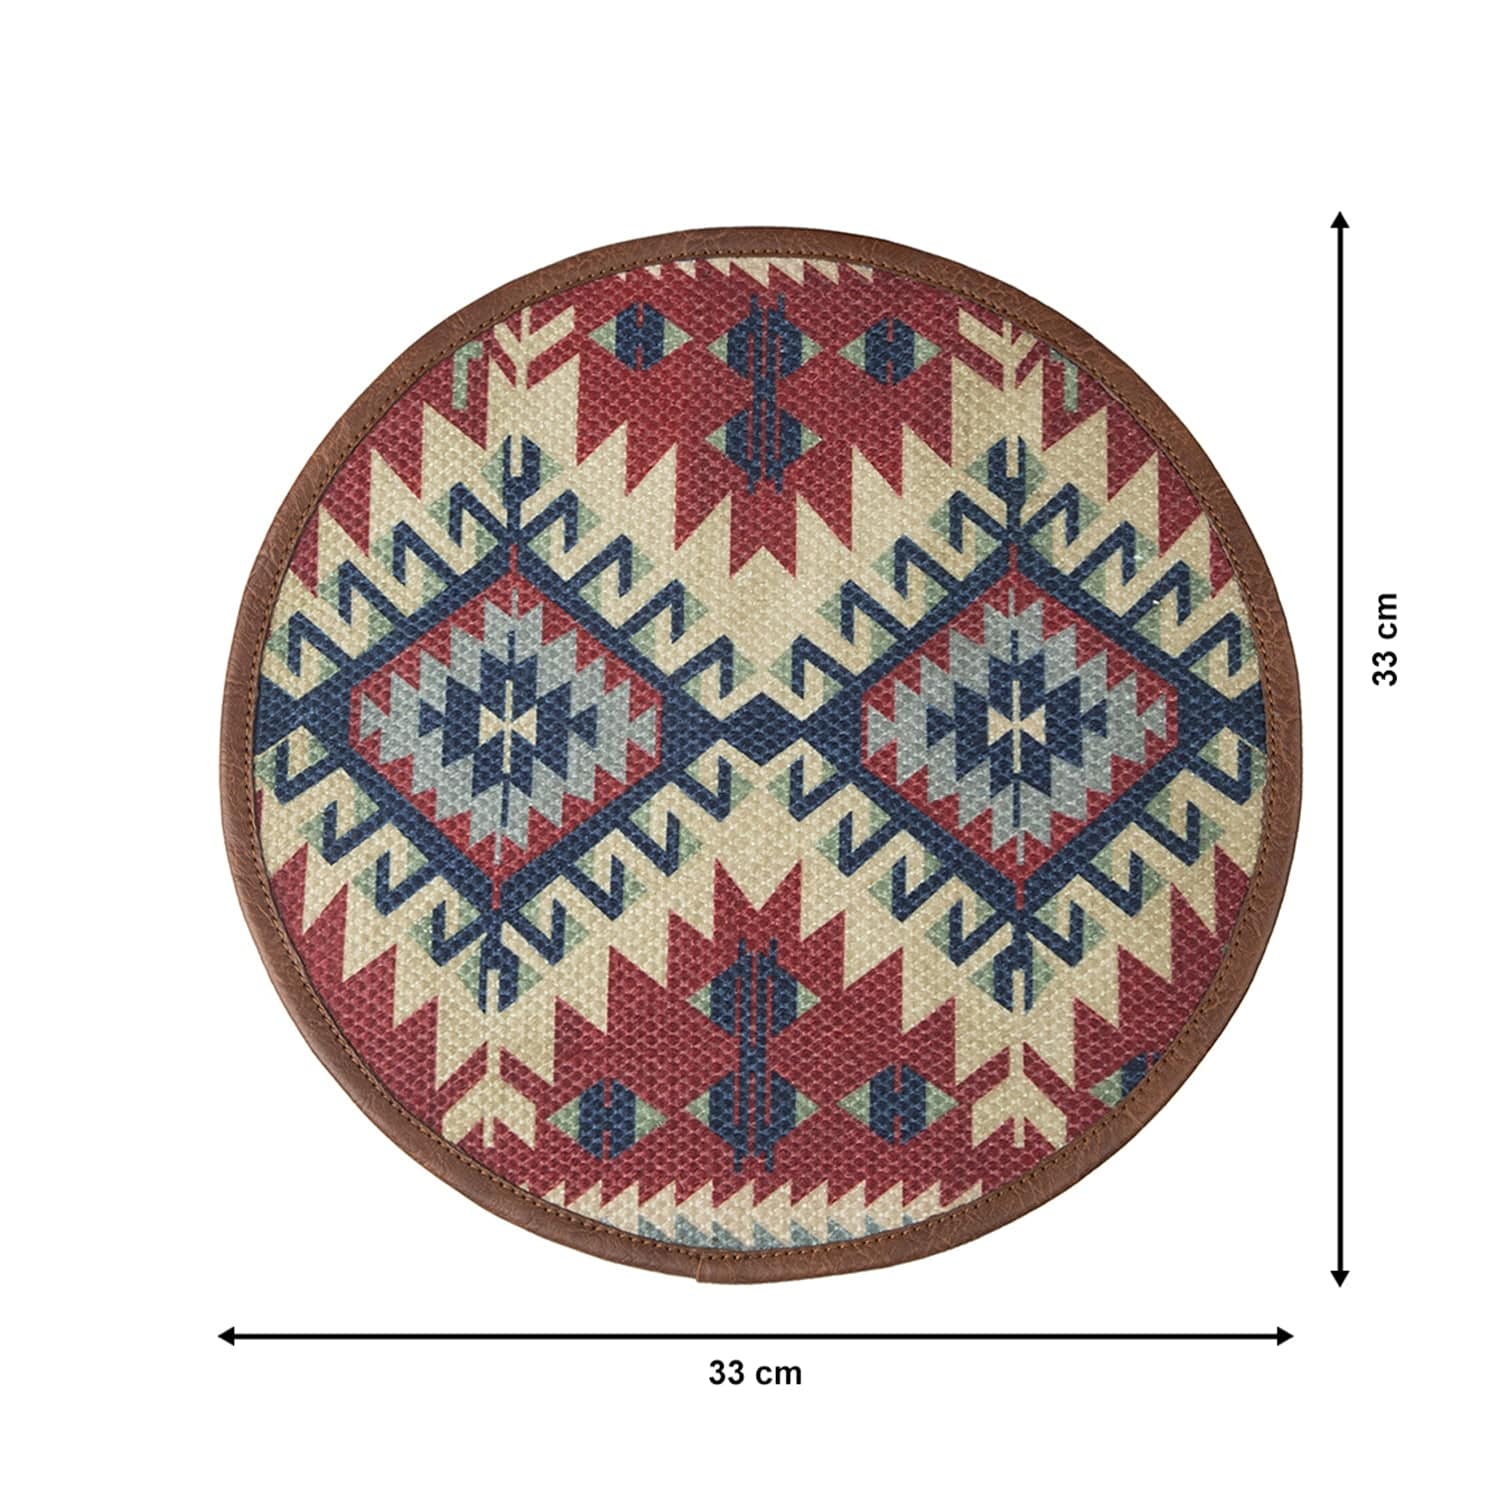 Mona B Set of 2 Printed Mosaic Placemats, 13 INCH Round, Best for Bed-Side Table/Center Table, Dining Table/Shelves (Kilm) - Placemat by Mona-B - Backpack, Flat30, New Arrivals, Sale, Shop1999, Shop2999, Shop3999